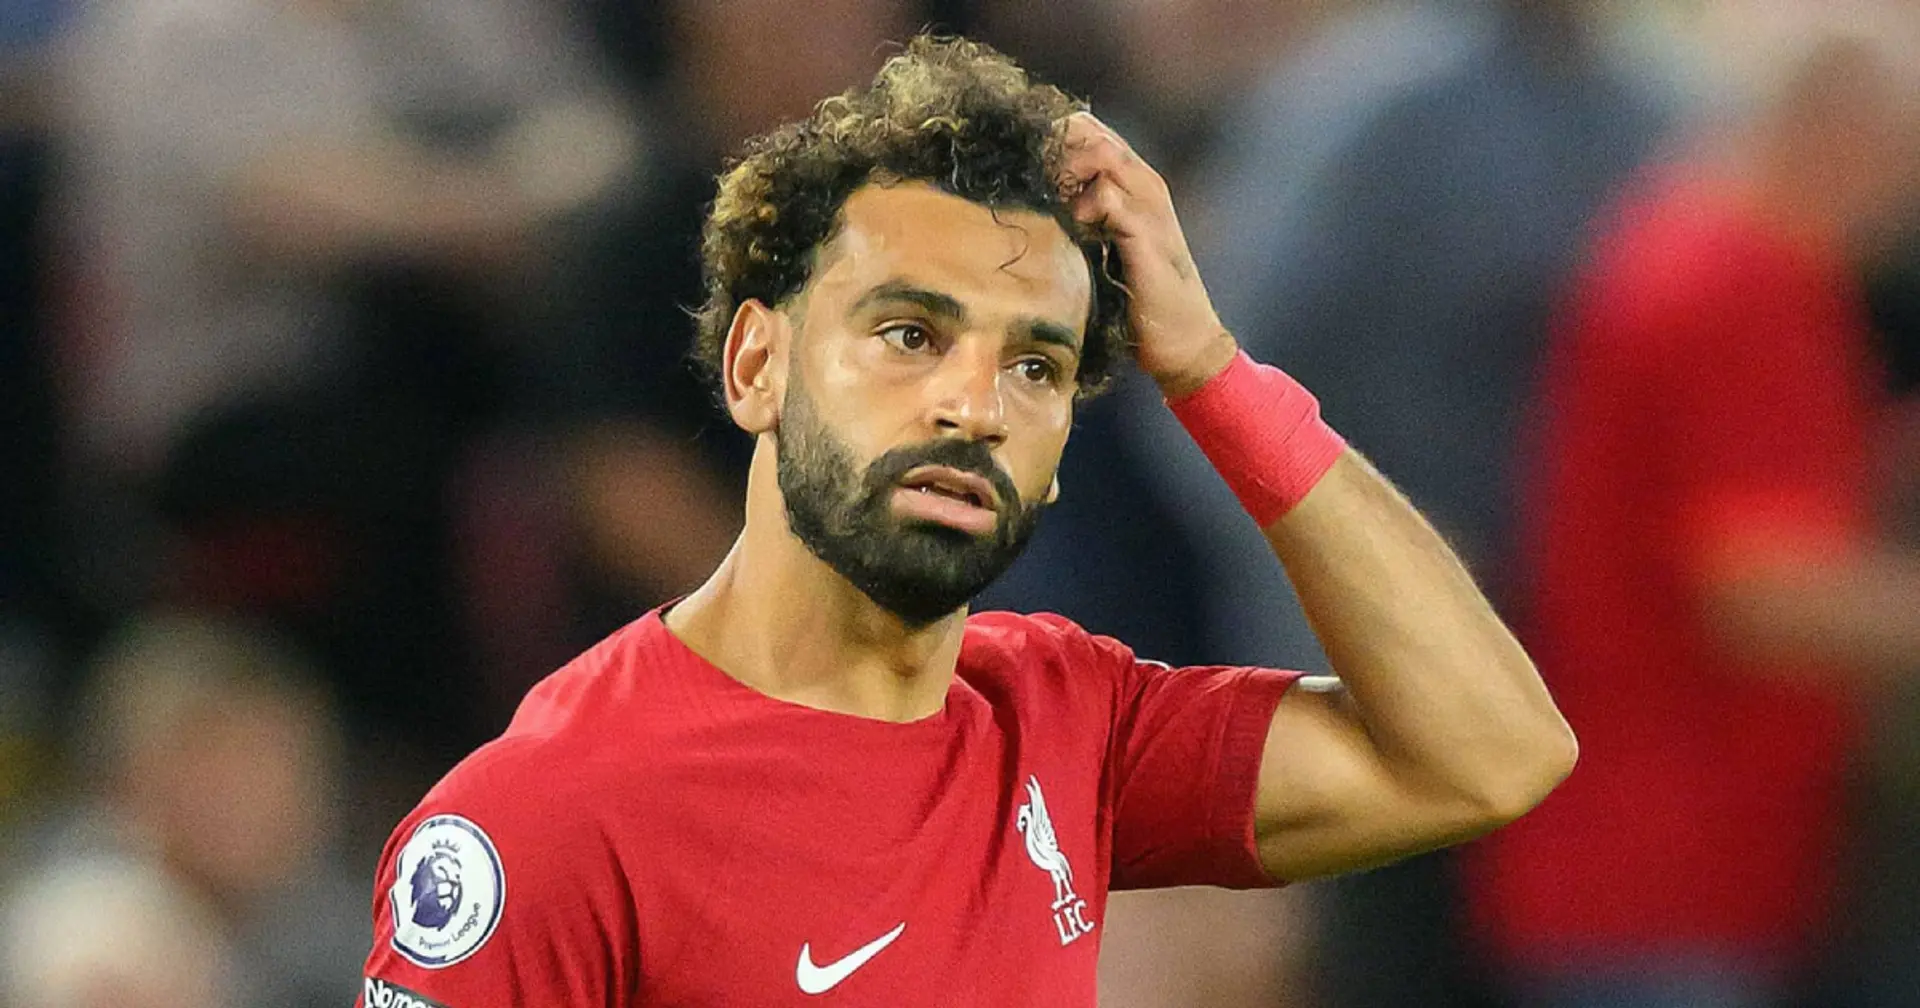 Are you concerned about Mo Salah's form?